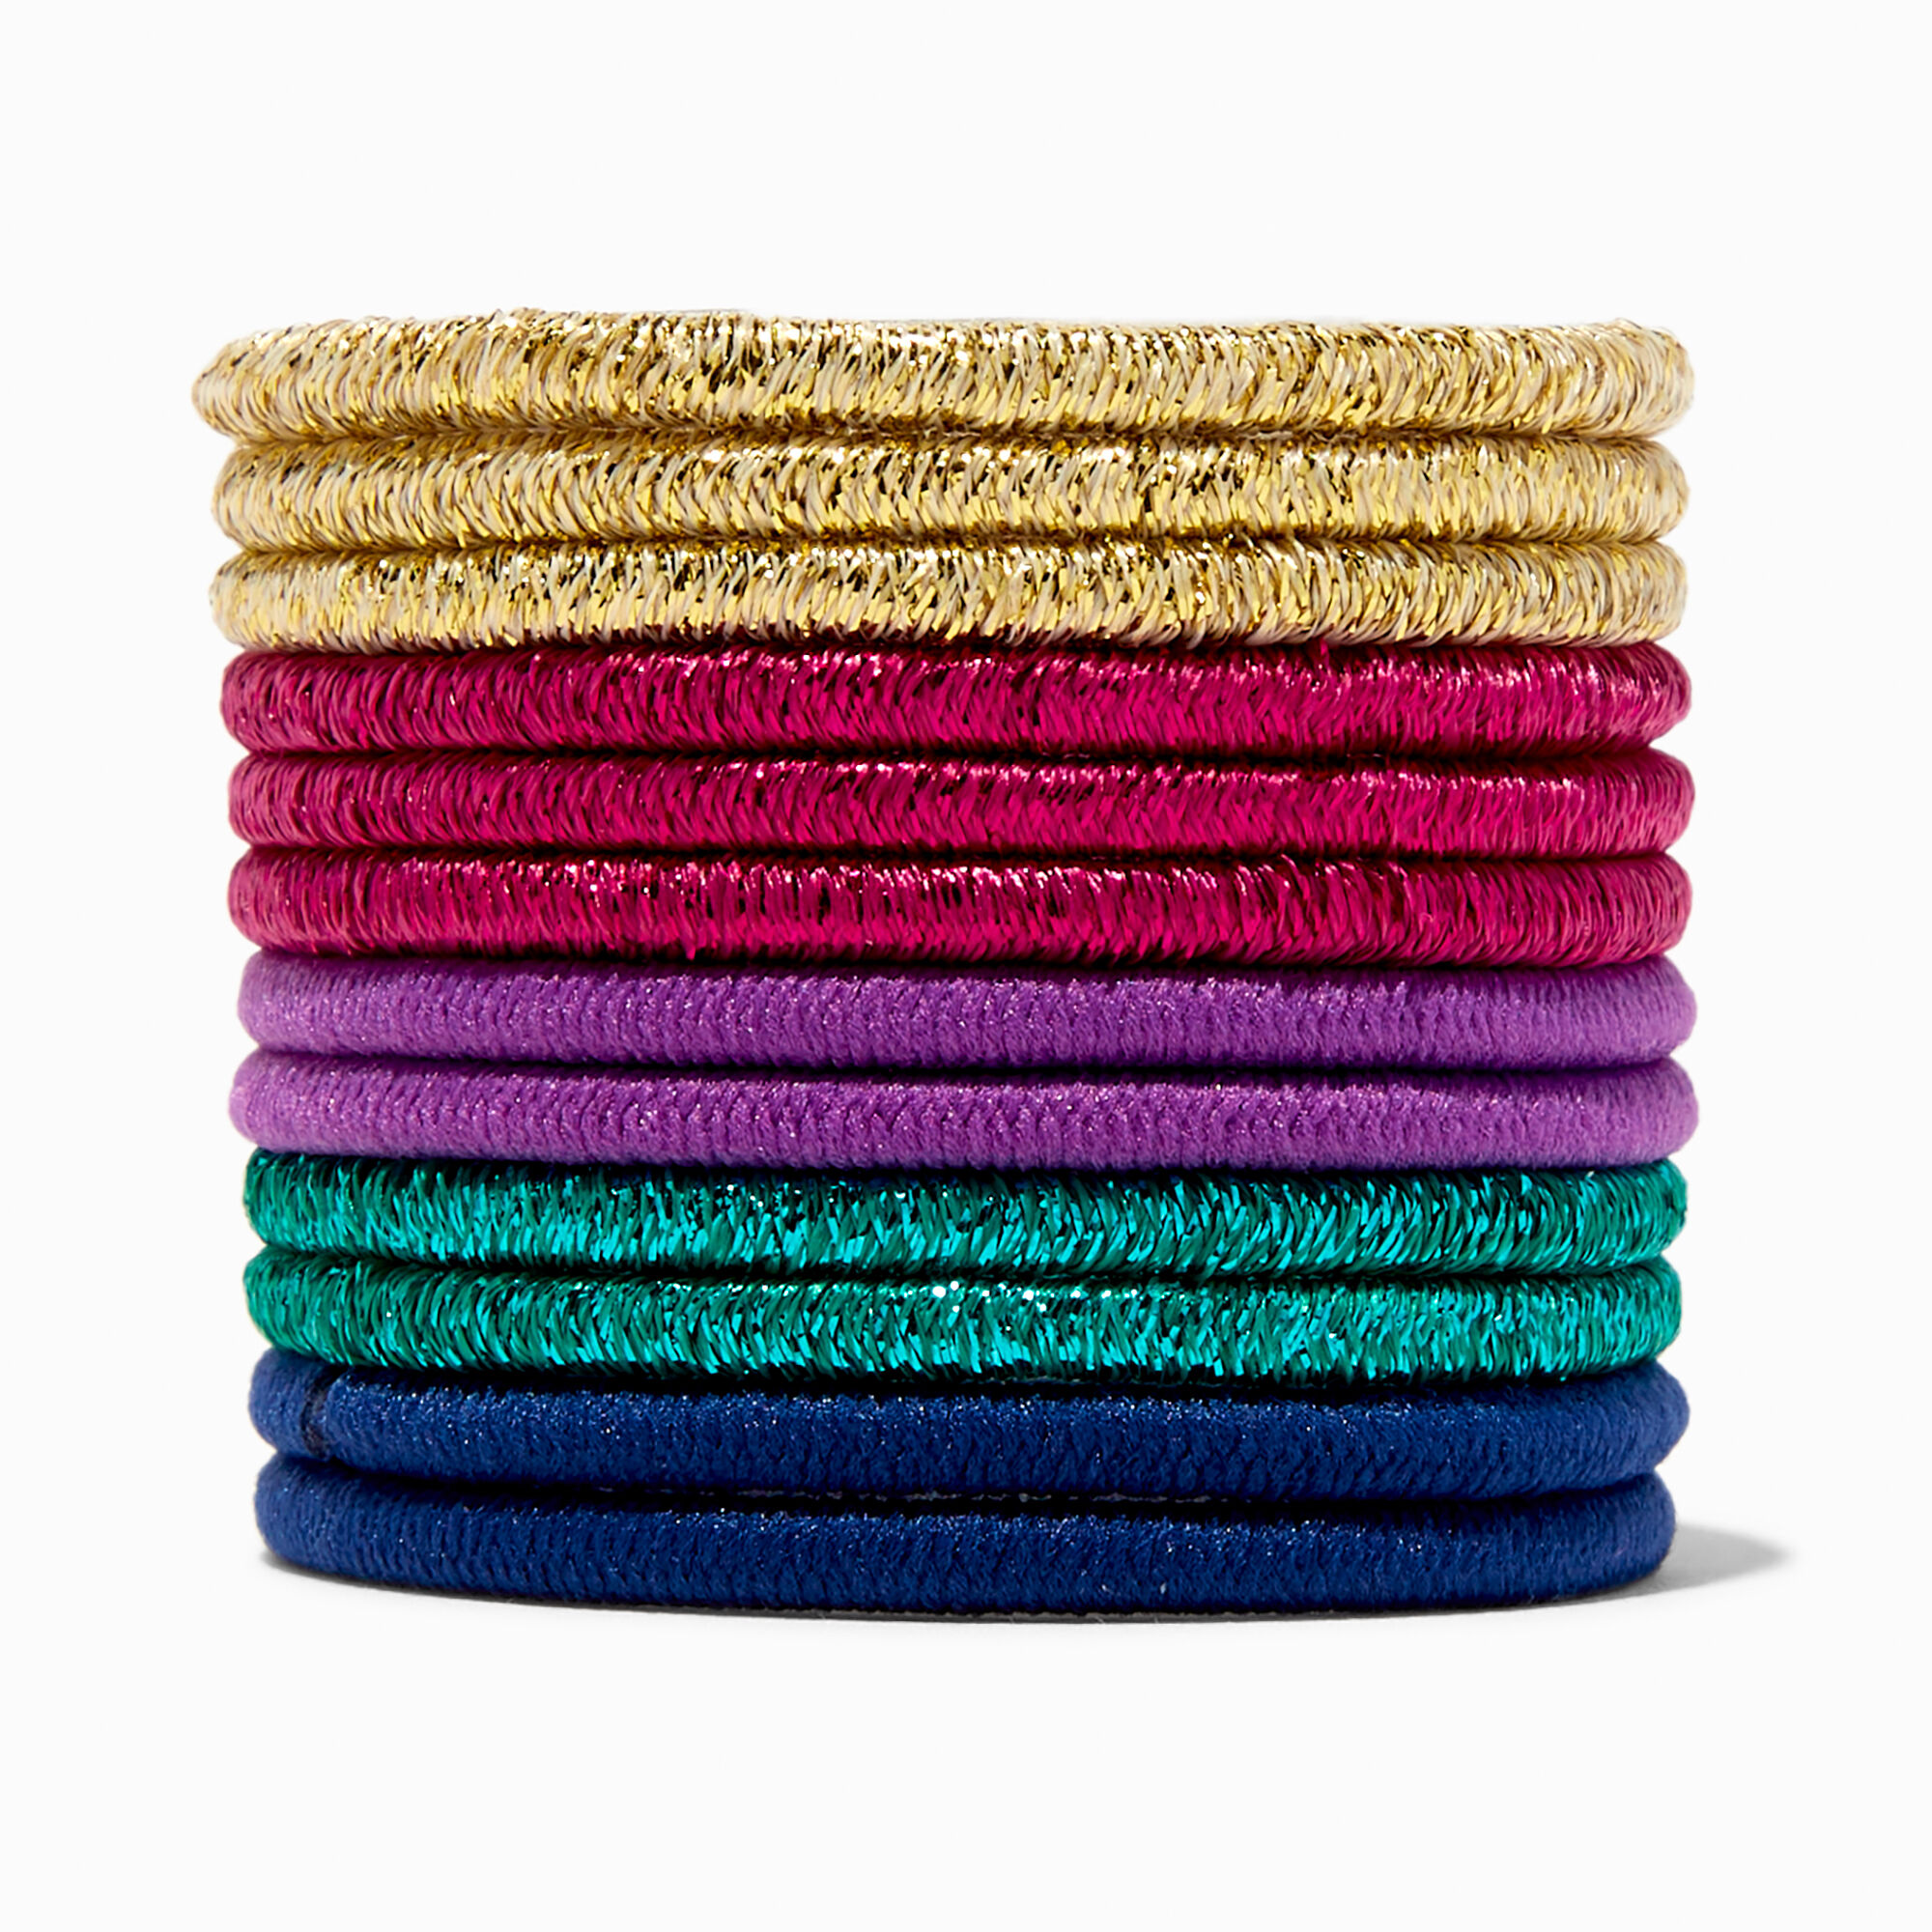 View Claires Jewel Tone Luxe Hair Ties 12 Pack information